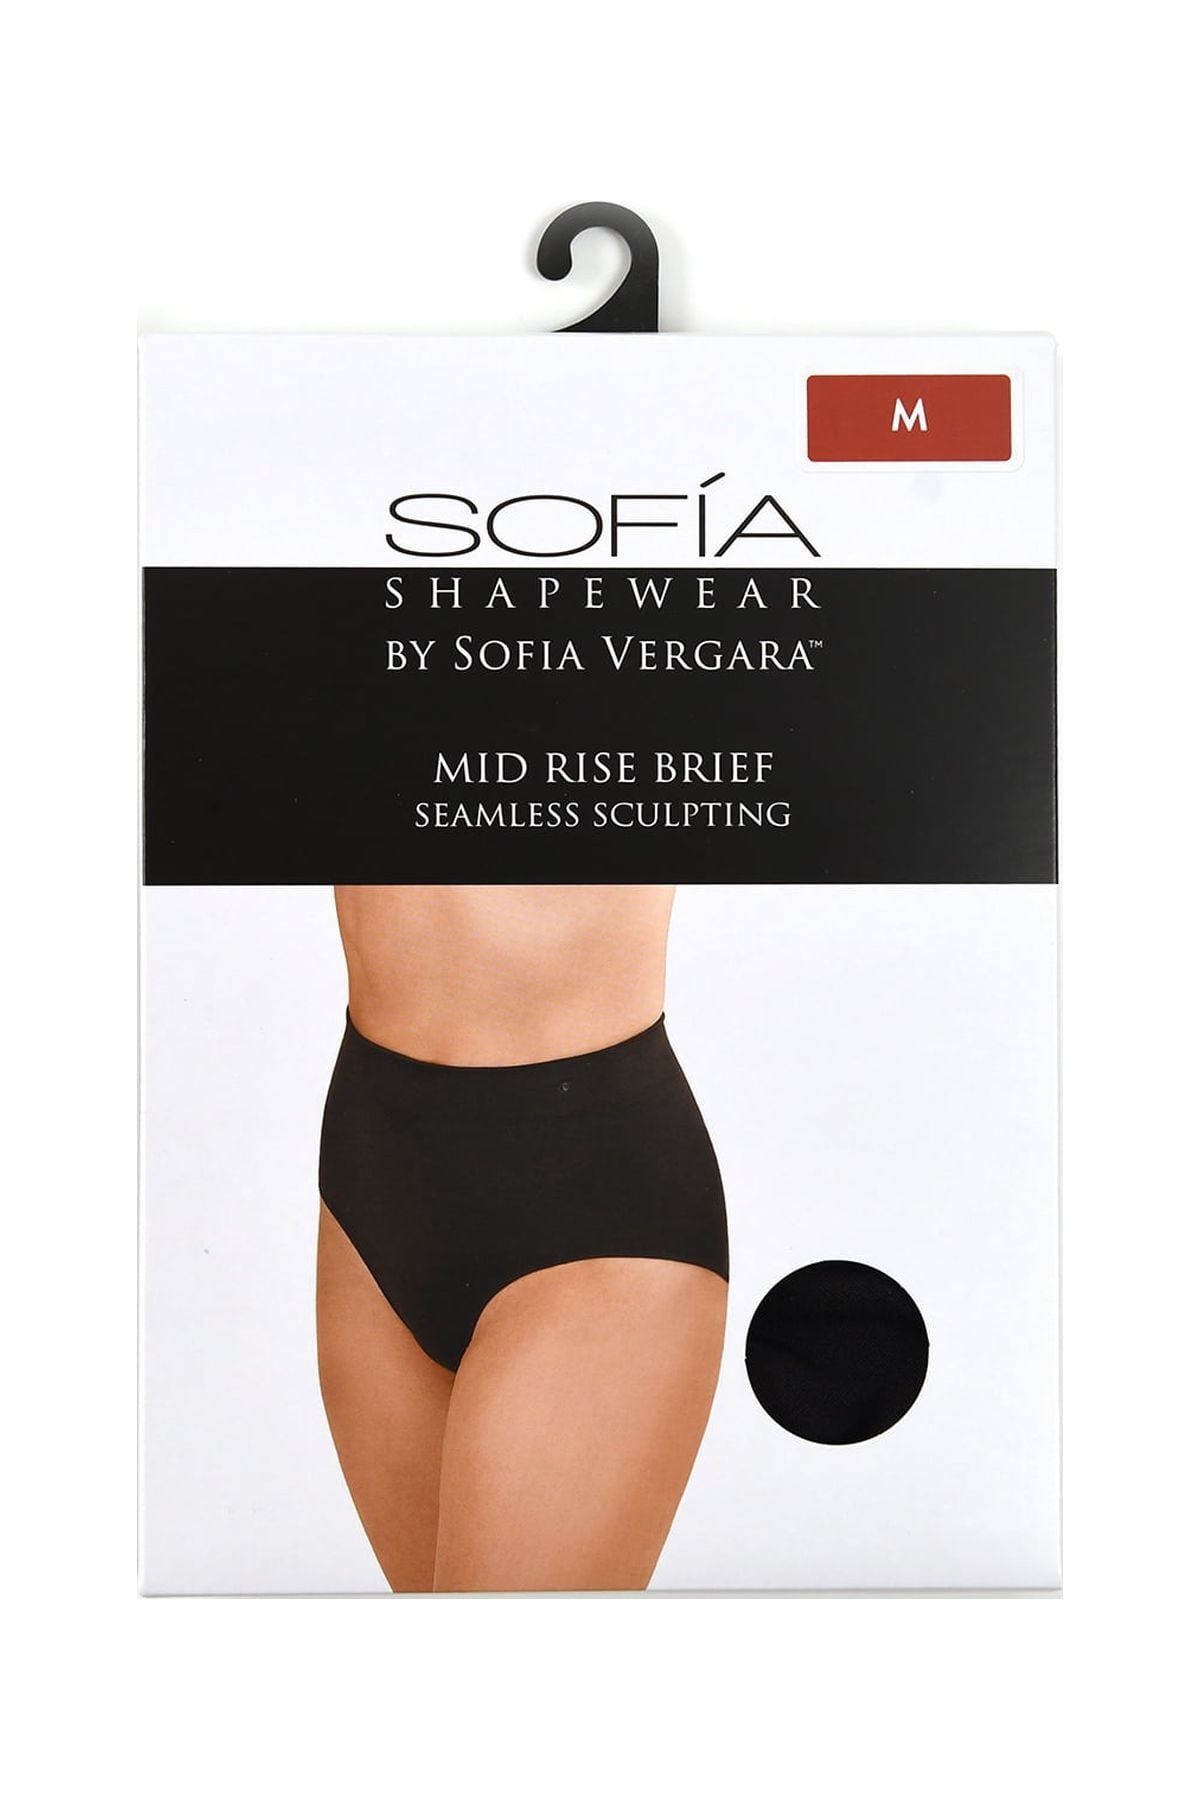 Sofia Vergara also an entrepreneur having recently launched a new shapewear  product through her underwear company EBY. — Azure